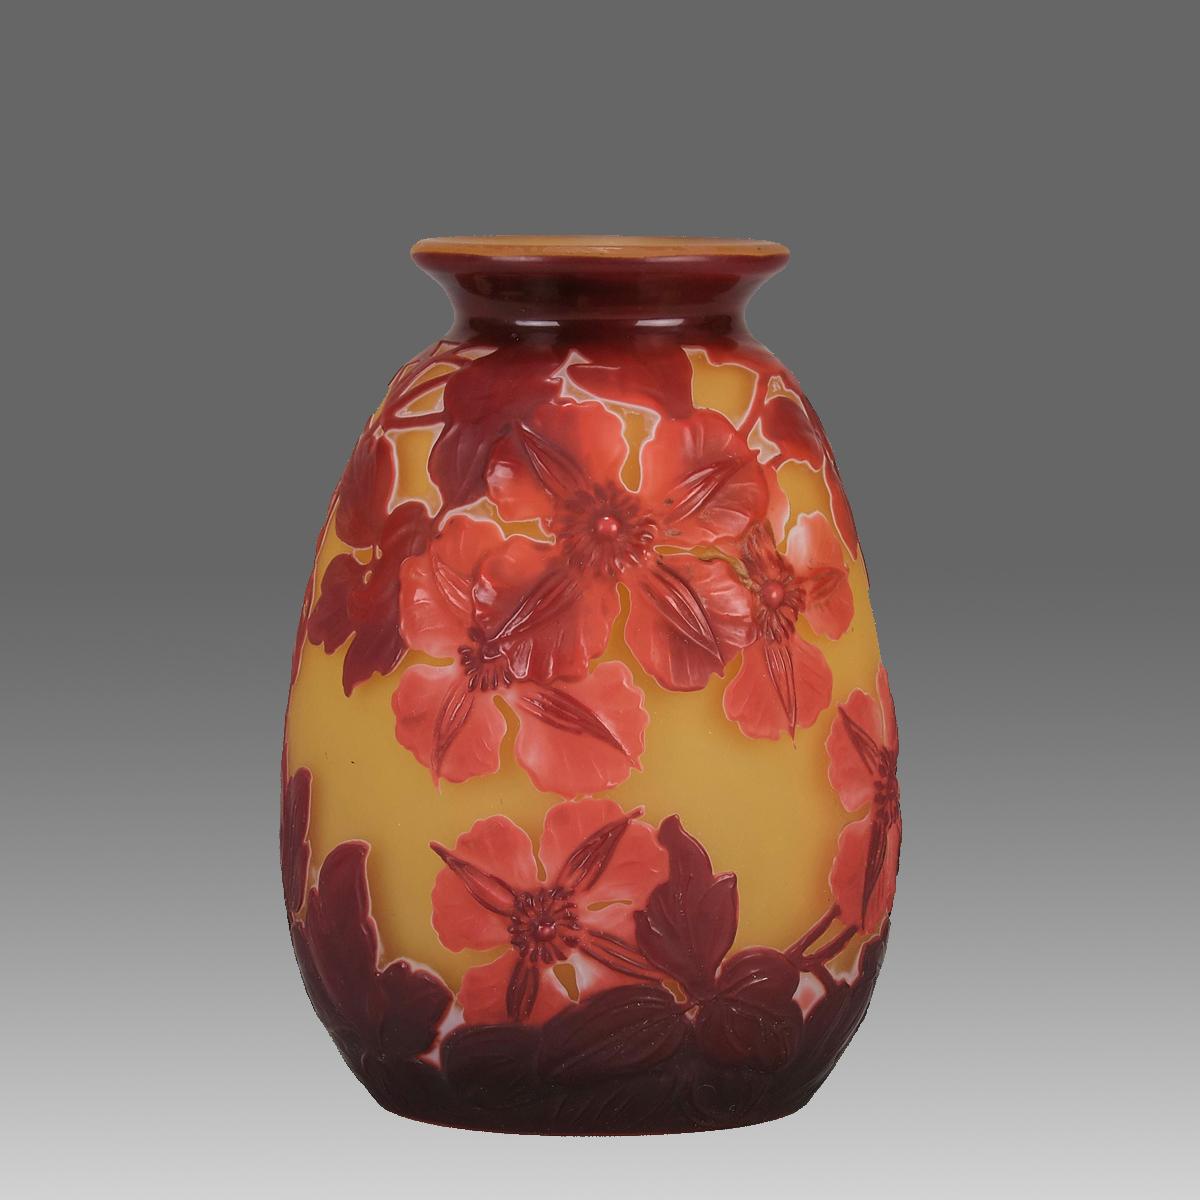 An attractive late 19th Century French cameo glass souffle vase decorated with raised deep red and burgundy flowers against a variegating yellow field. Exhibiting excellent detail and colour, signed Galle in cameo.

ADDITIONAL INFORMATION
Height:   